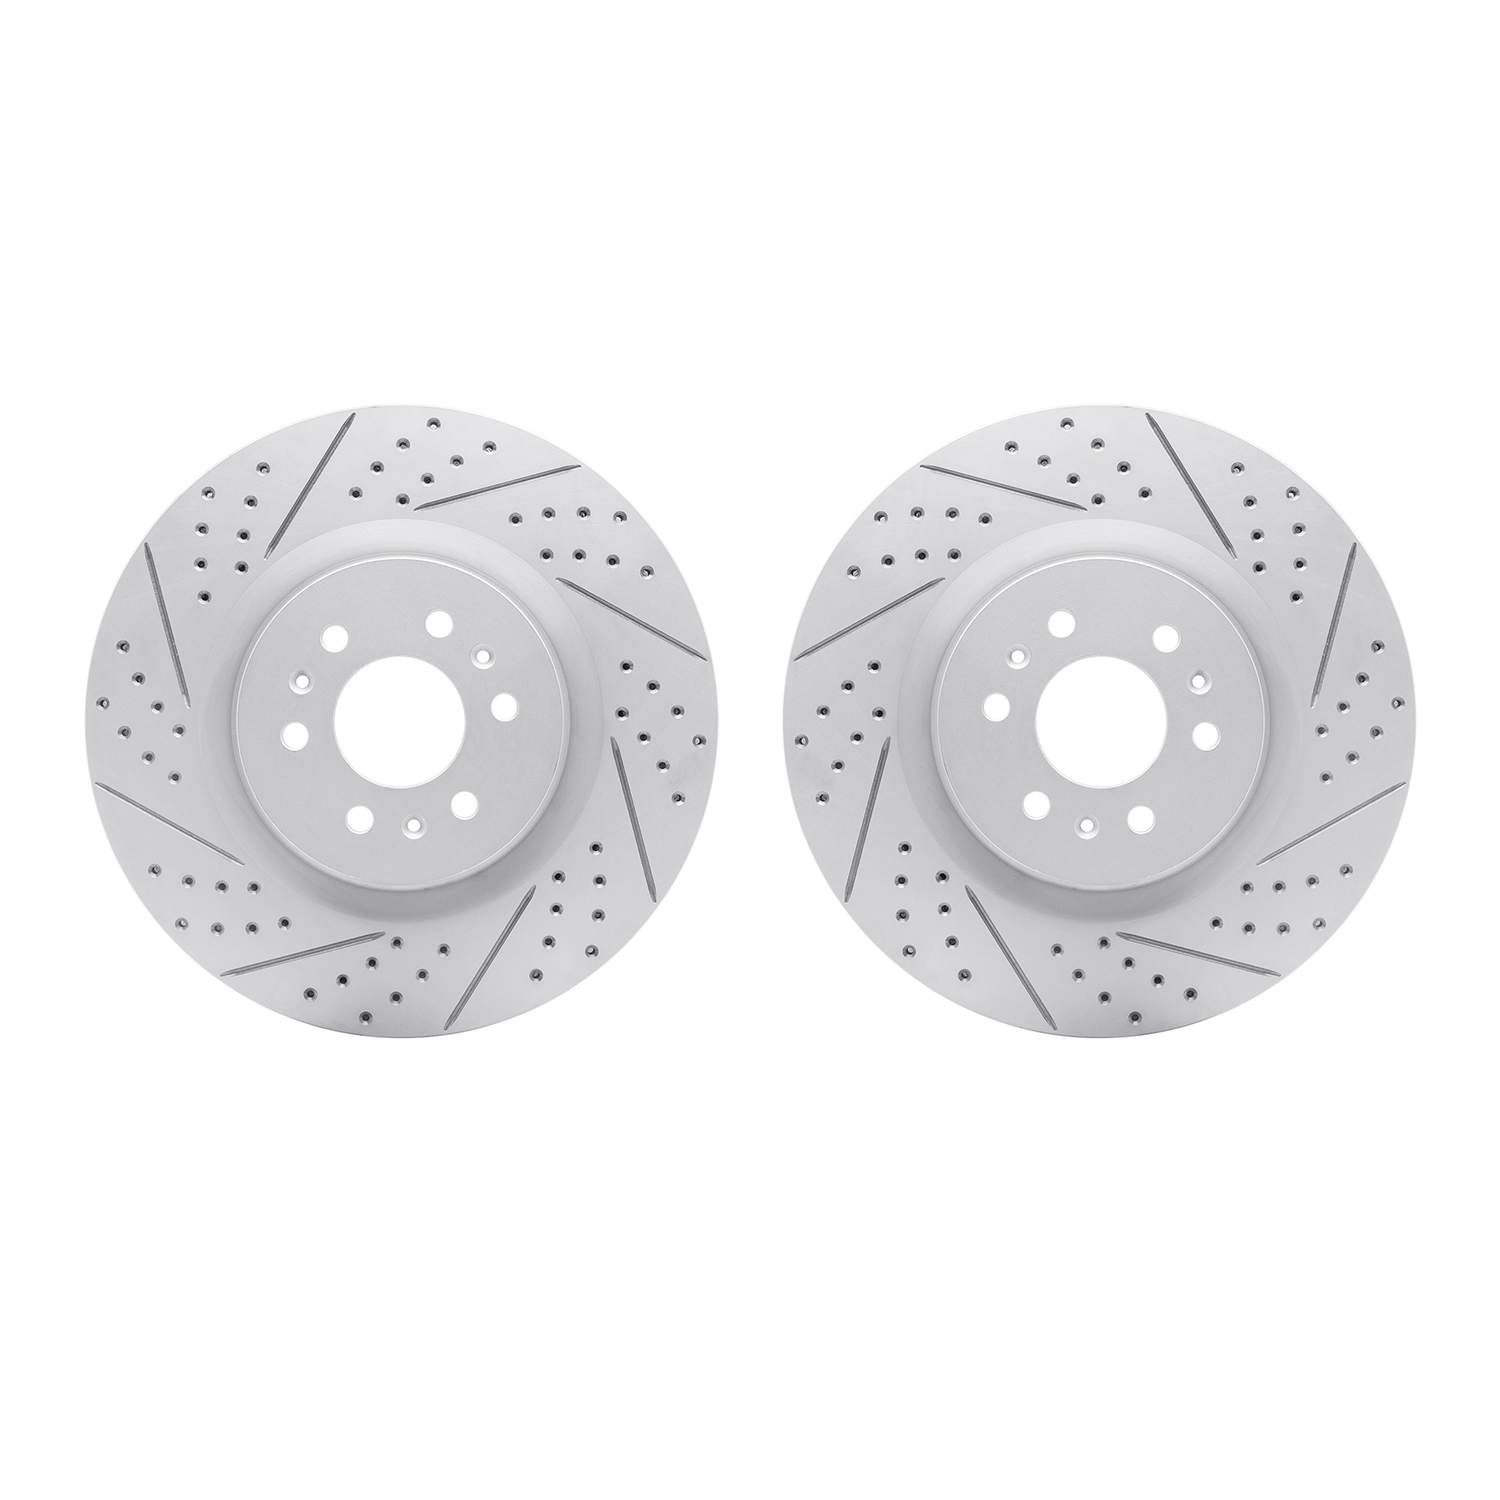 2002-46011 Geoperformance Drilled/Slotted Brake Rotors, 2004-2011 GM, Position: Front